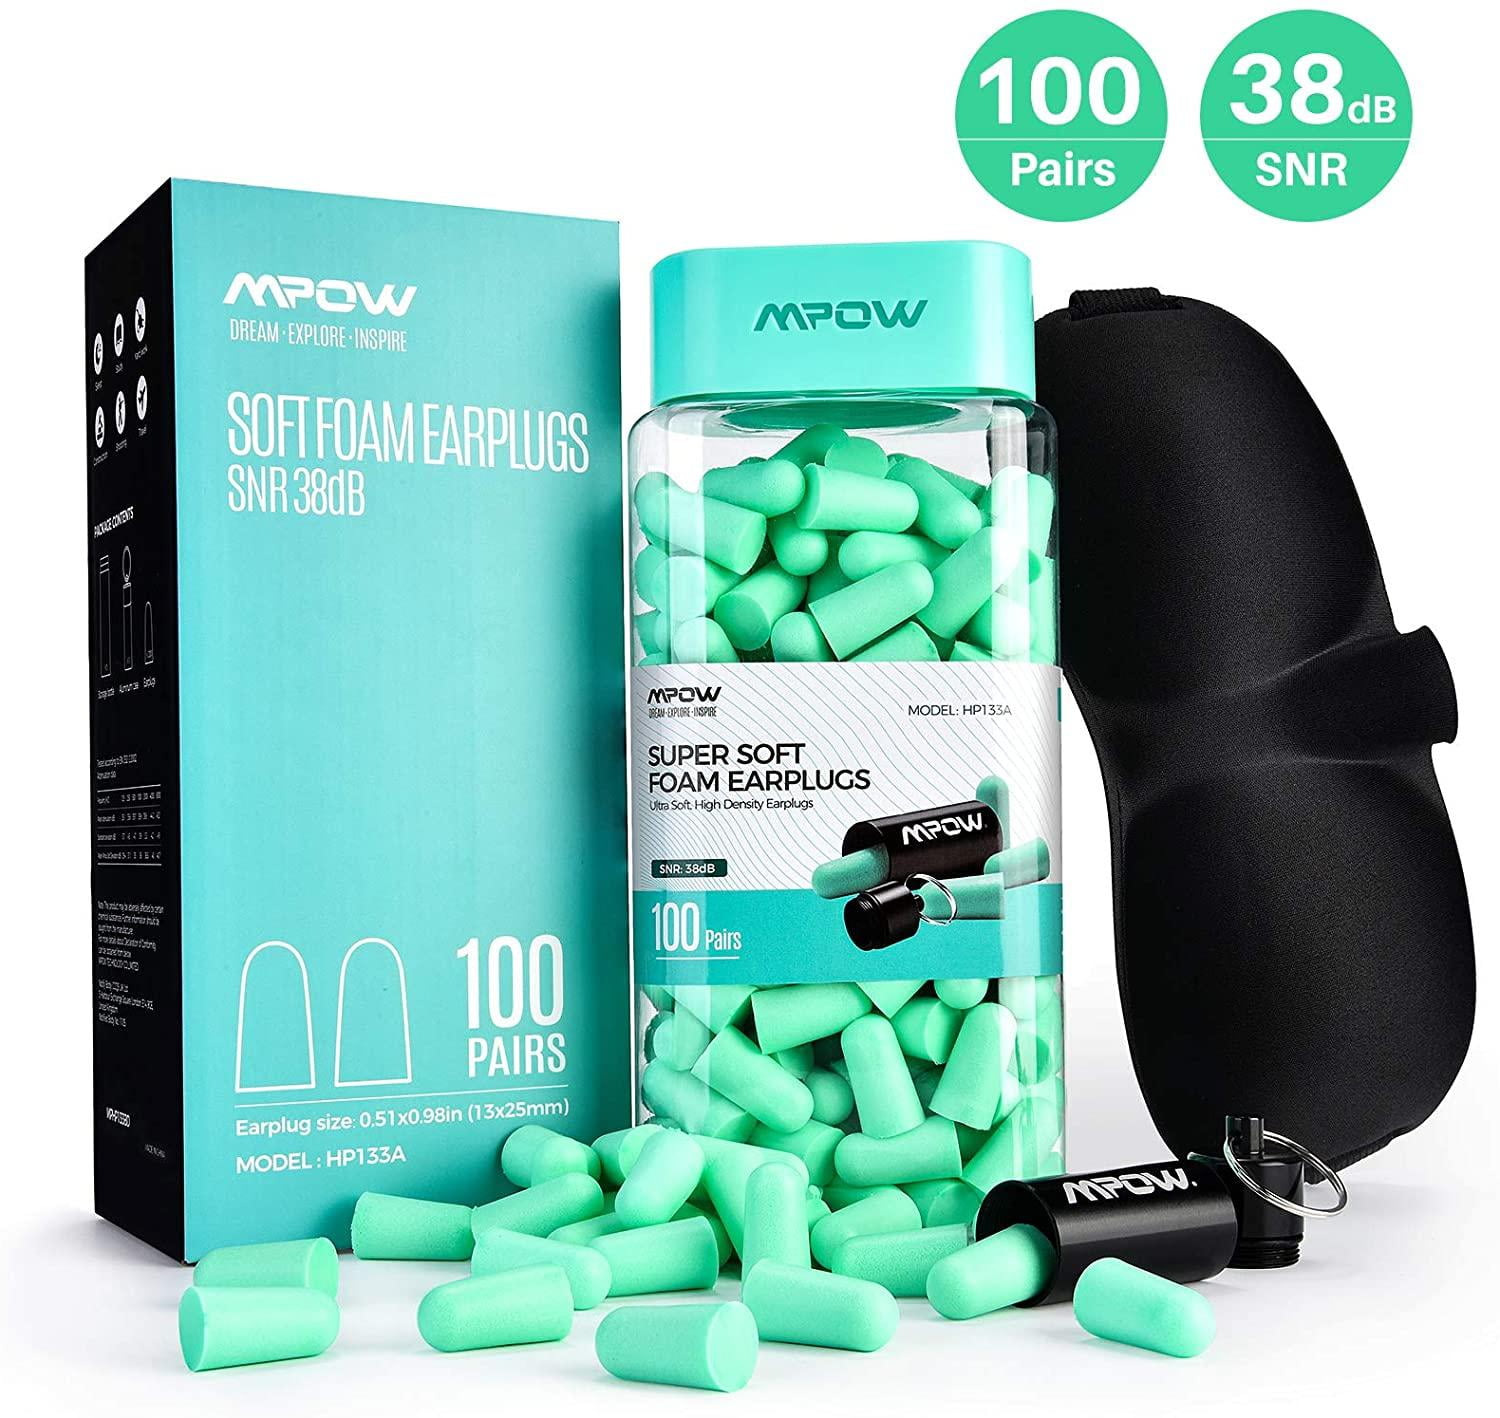 One Size Mpow Upgraded Super Soft Foam Earplugs 60 Pairs 38dB Highest SNR 